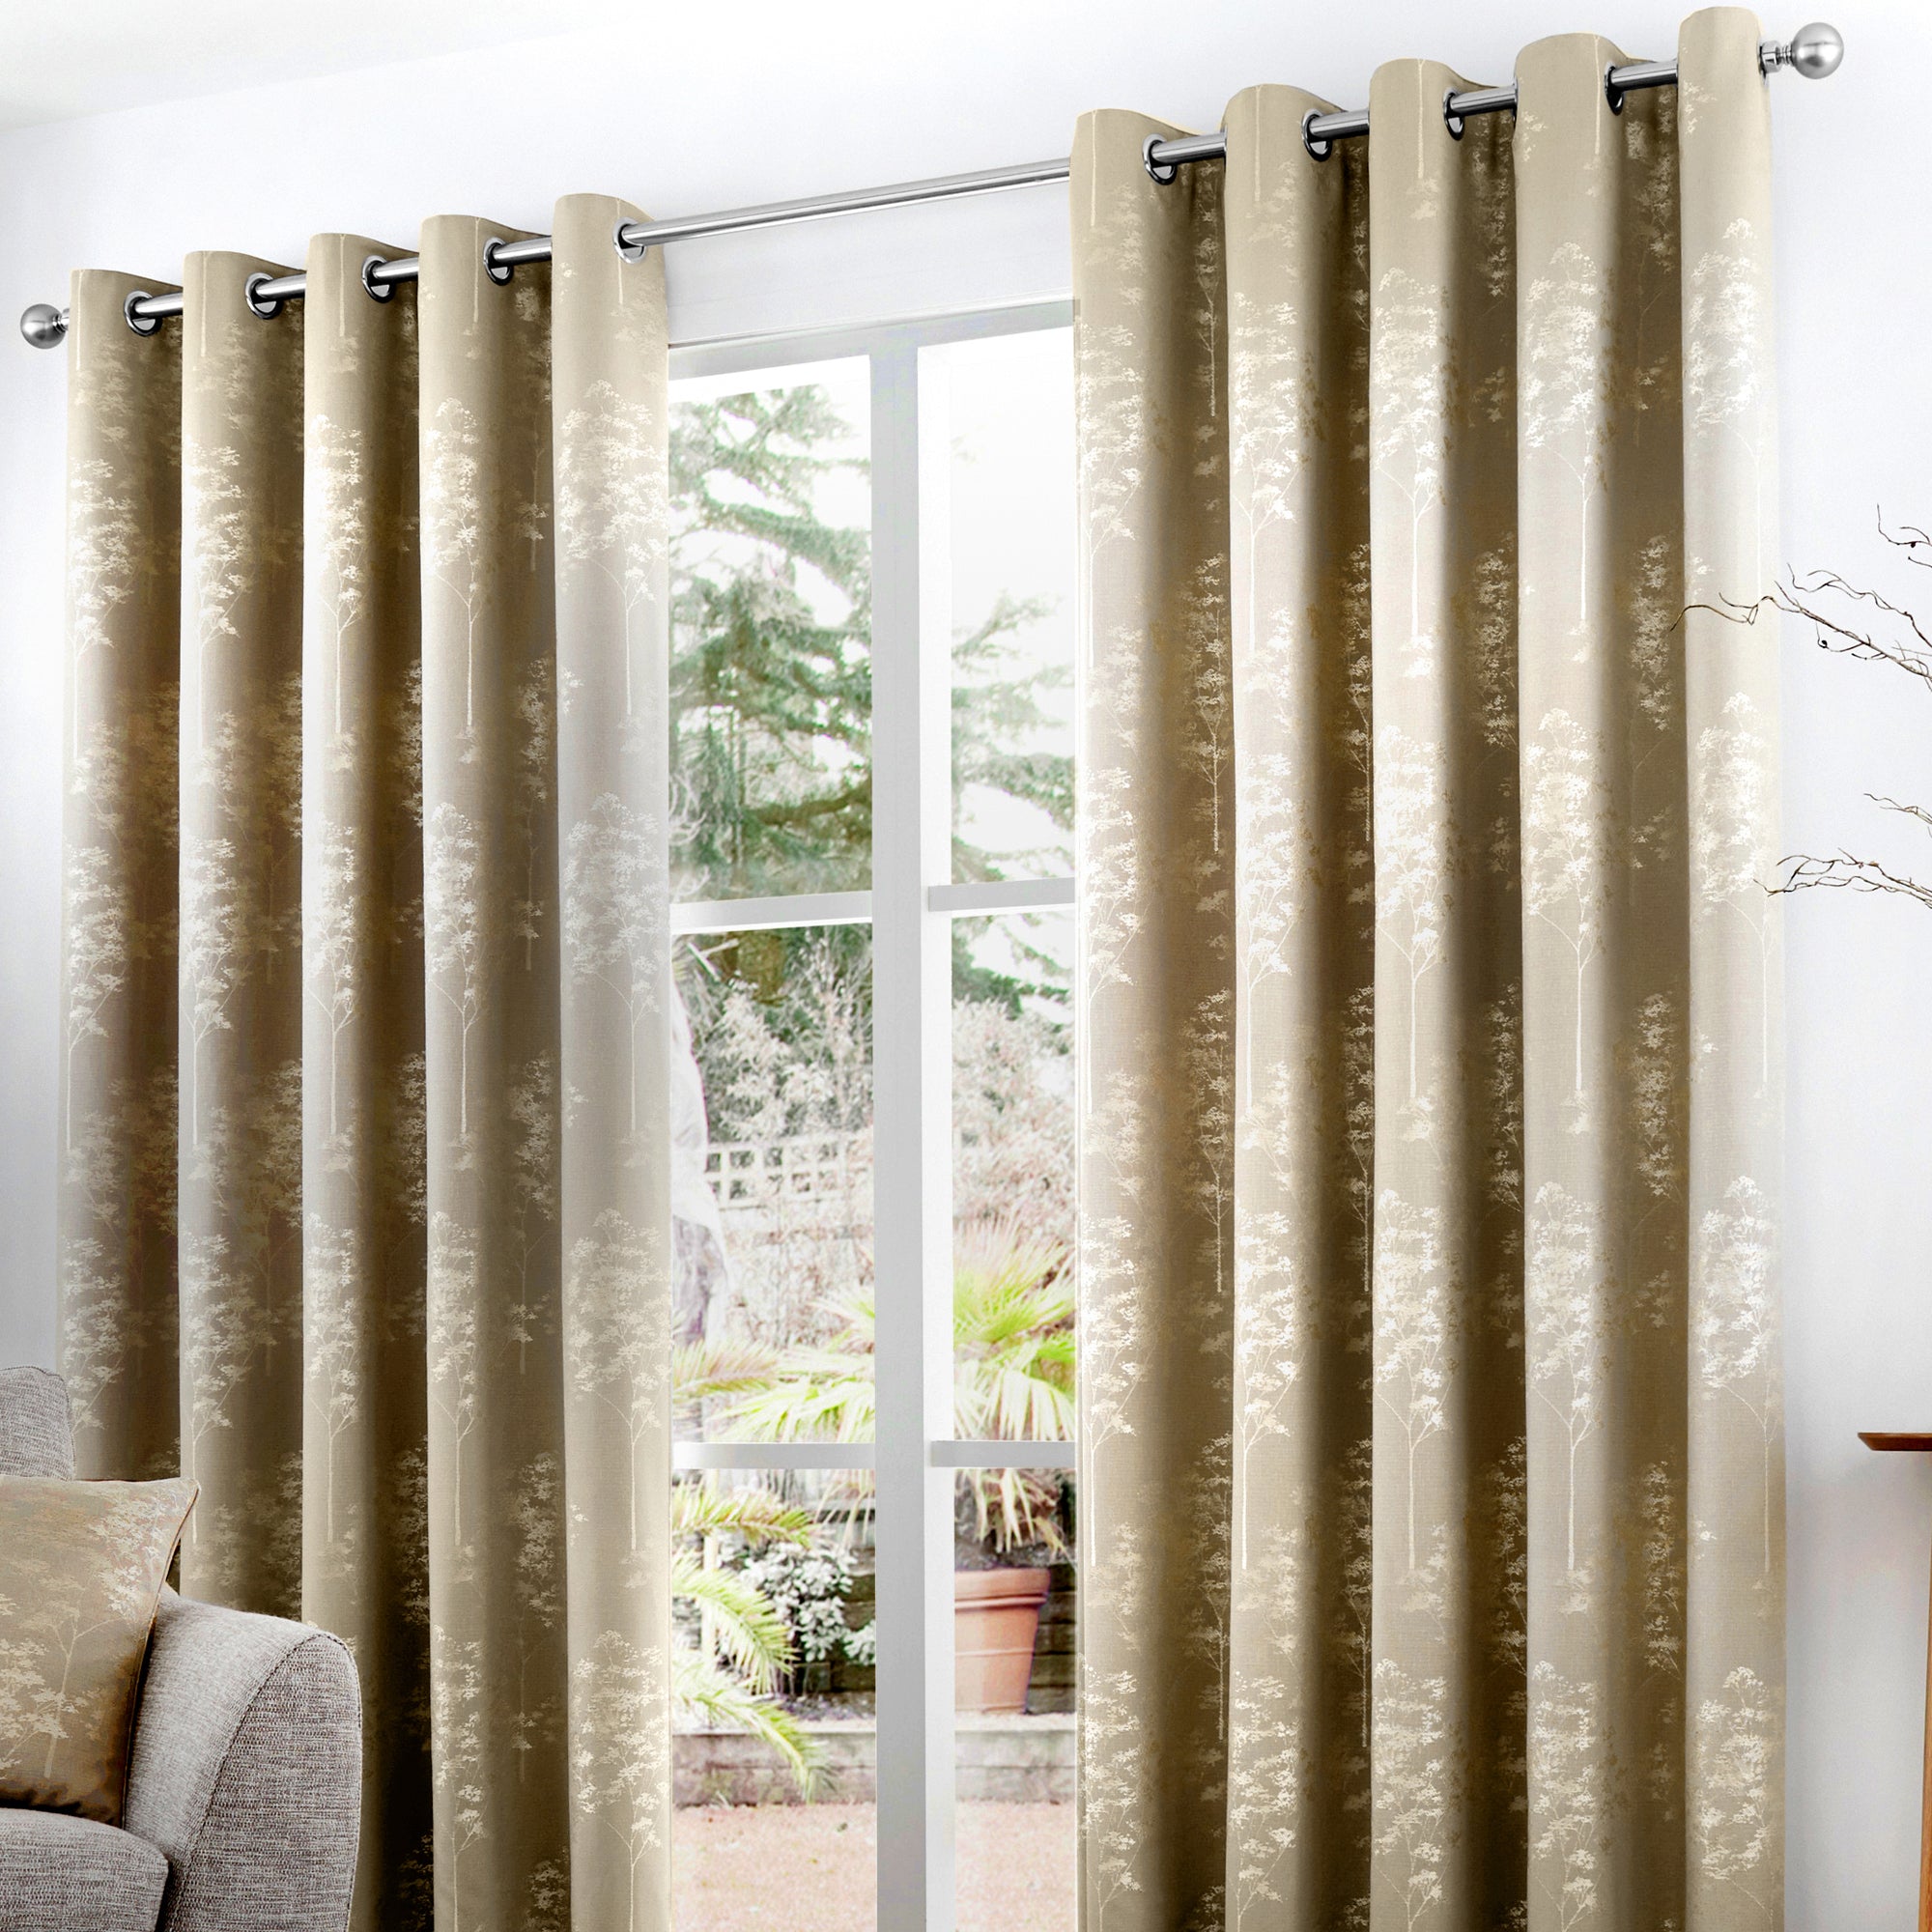 Elmwood - Lined Eyelet Curtains in Stone by Curtina